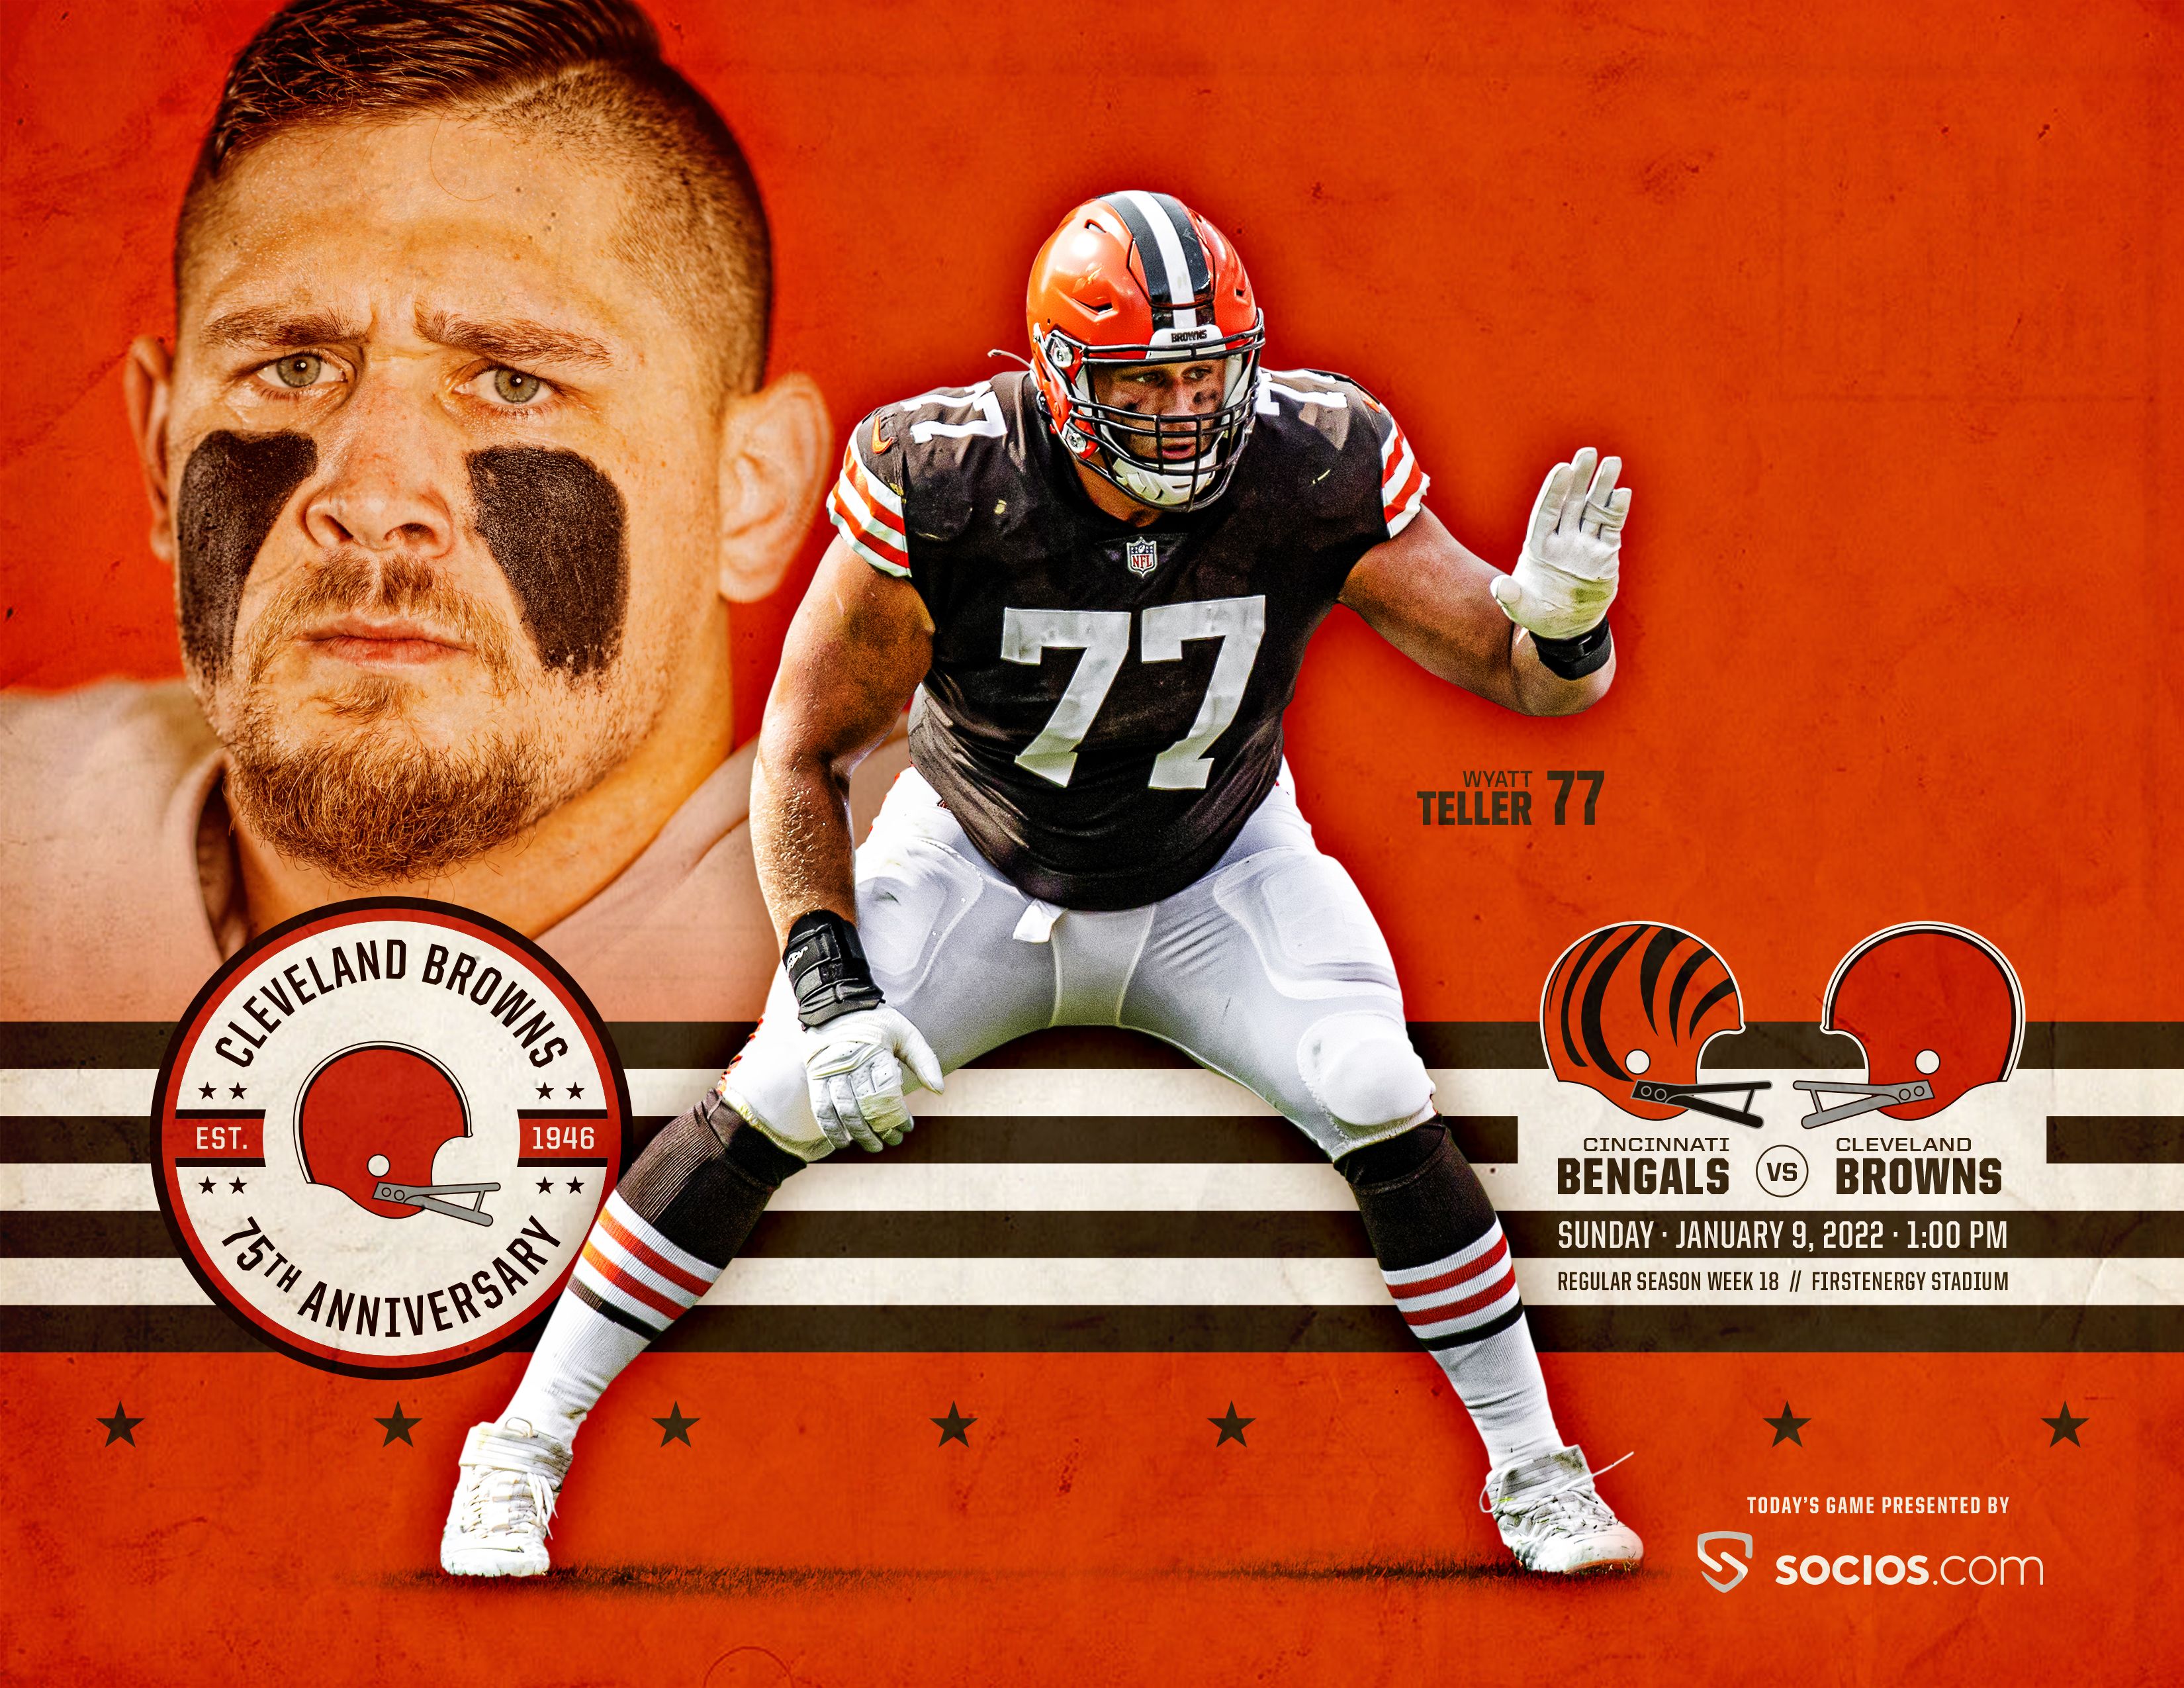 Clevelandbrowns.com. Official Site of the Cleveland Browns